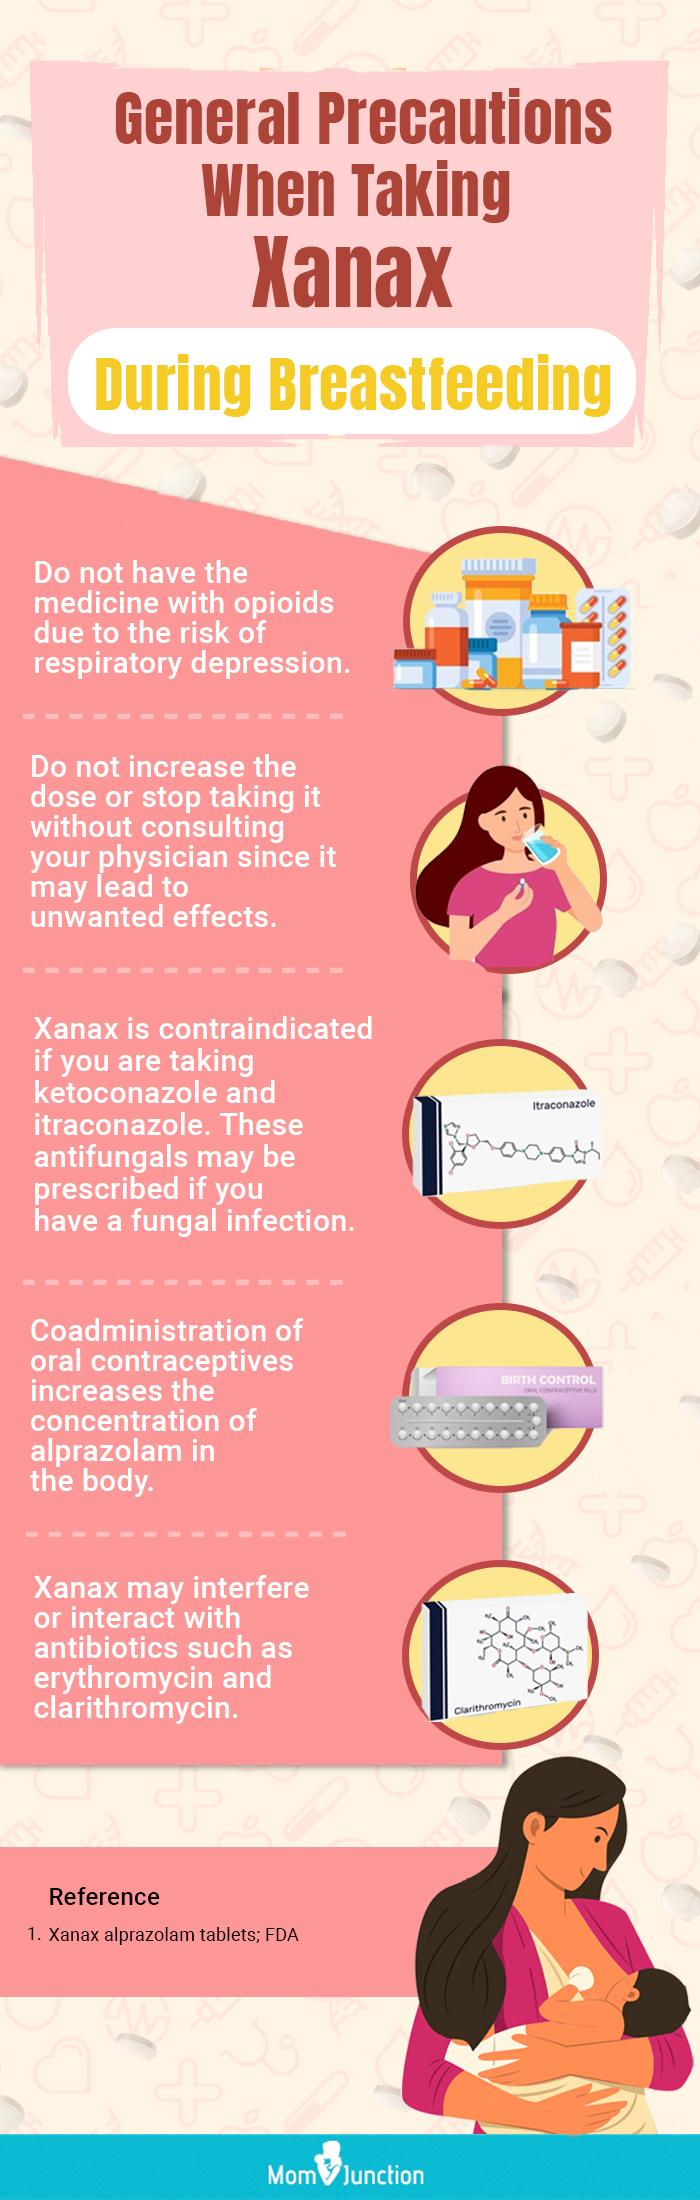 precautions when taking xanax during breastfeeding [infographic]